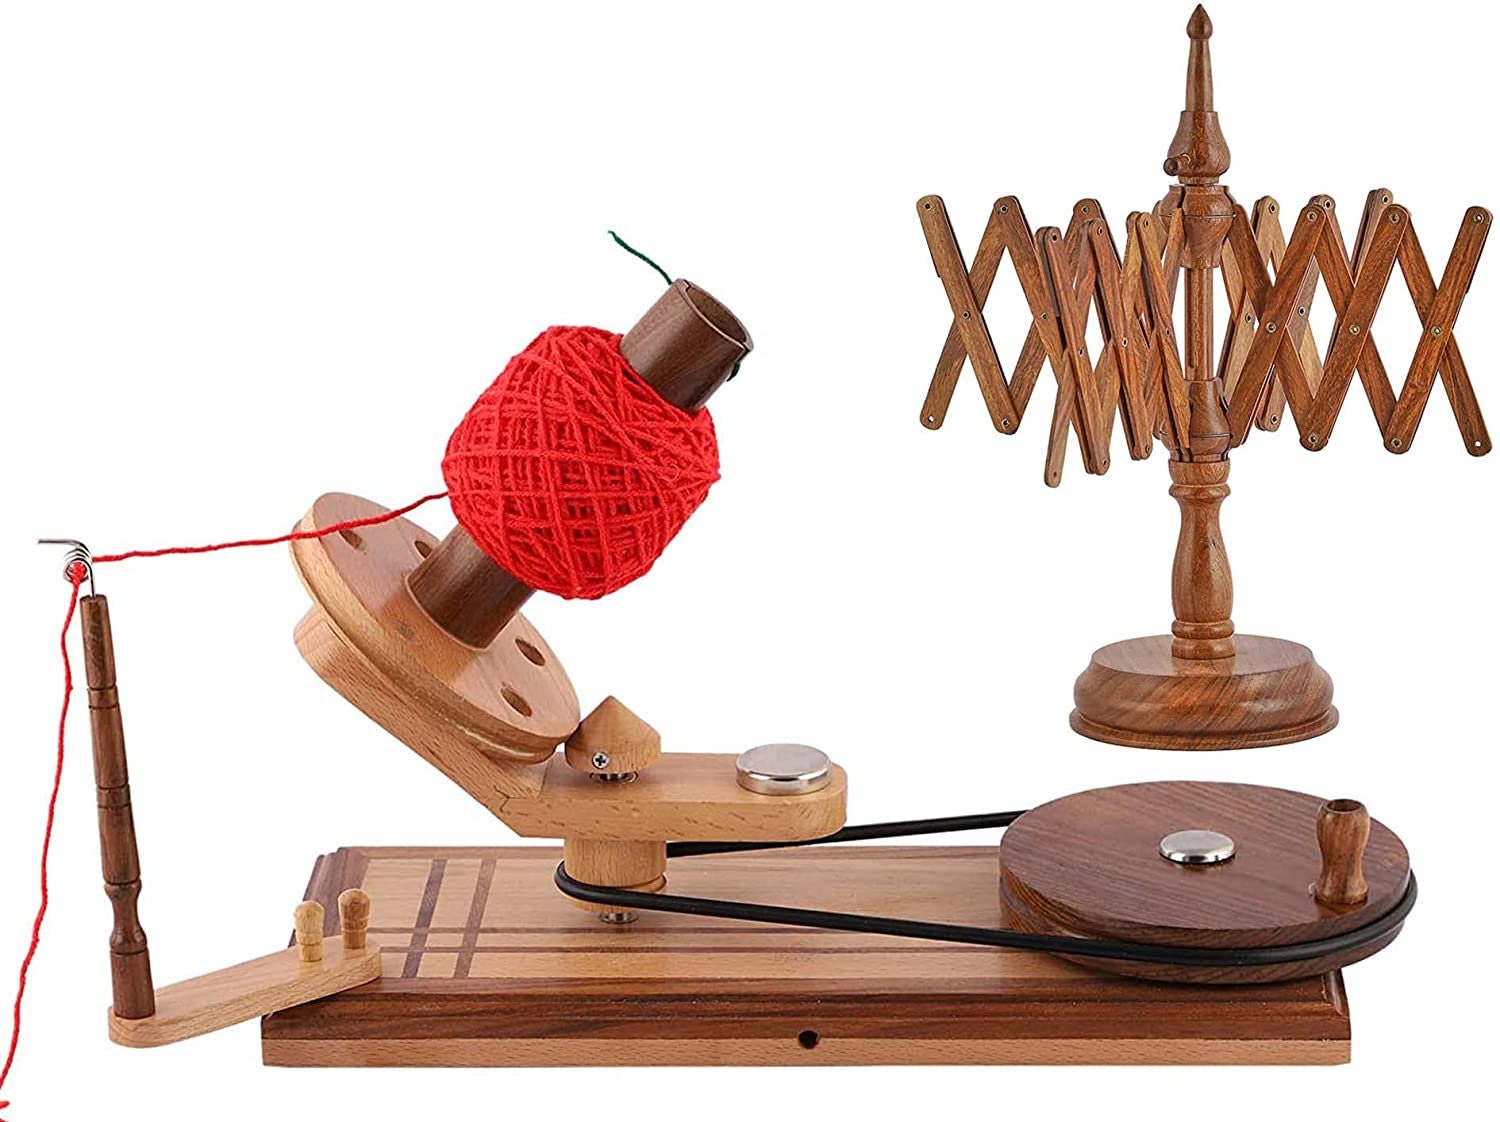 Hand Operated BIG Swift, Yarn, Wool, Speedy Ball Winder With Big Wheel of  14.5 Cm Dia and String Holder Knitting & Crochet Accessories 